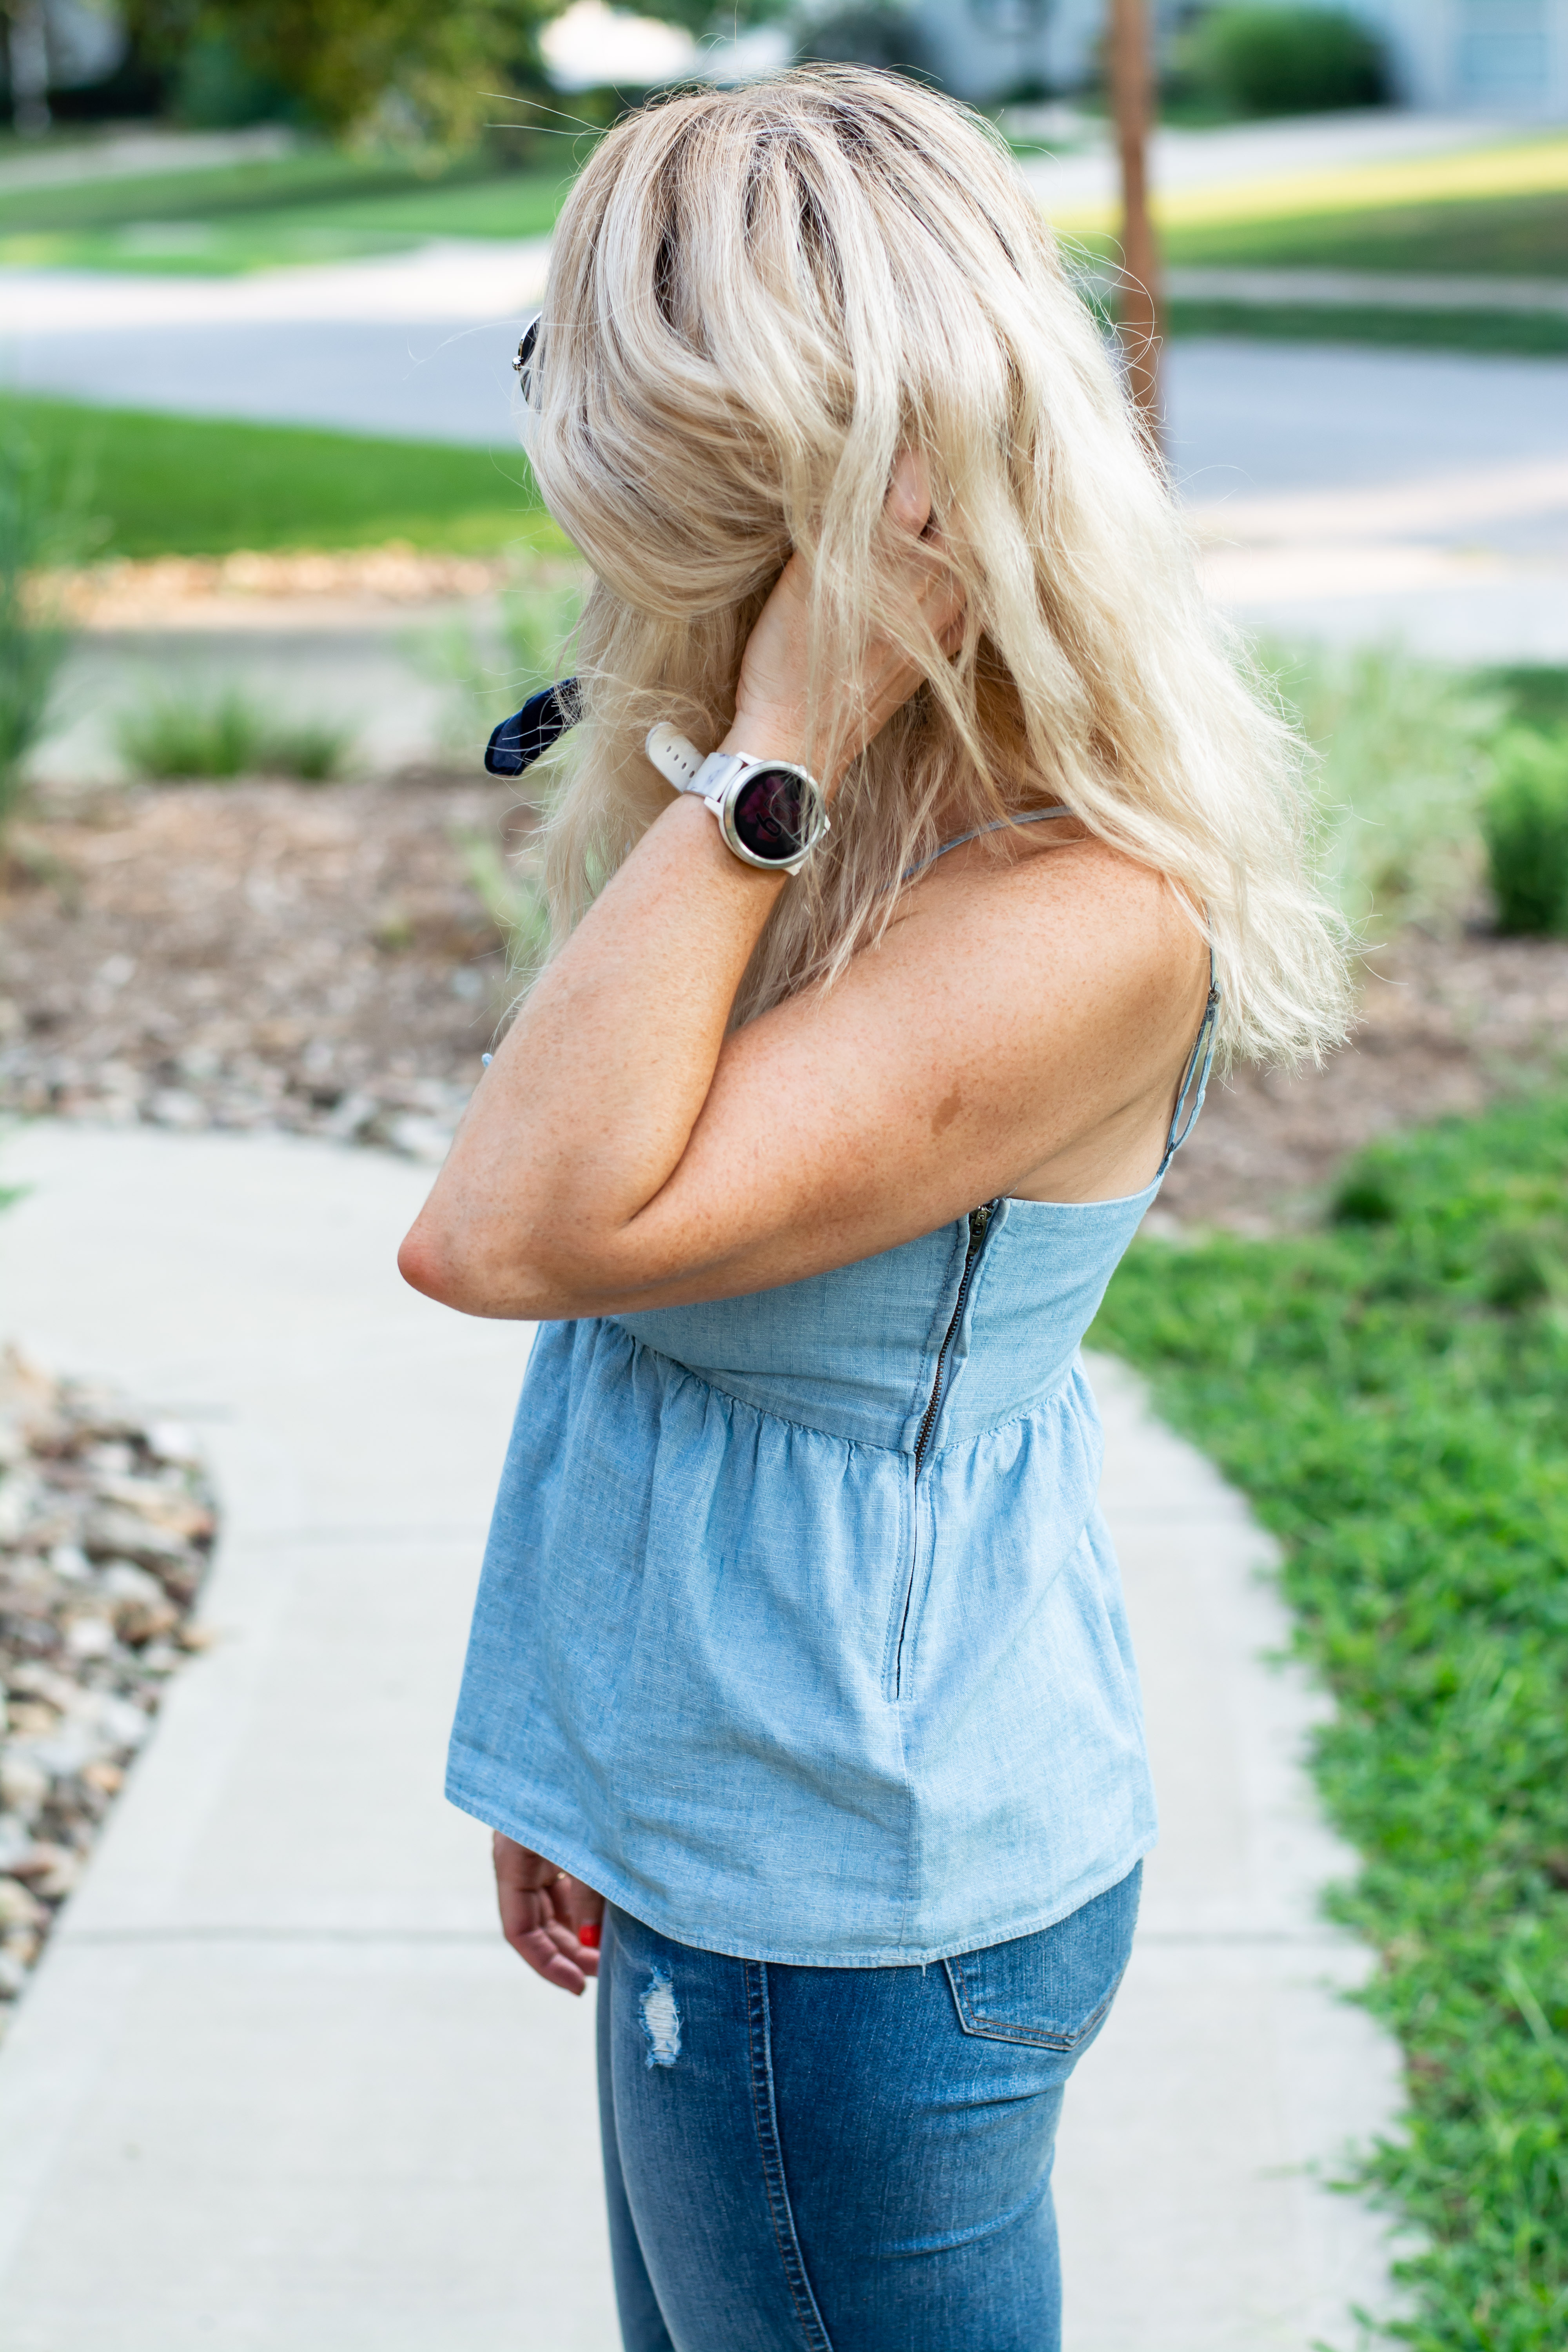 Outfit Idea: Madewell Summer Canadian Tuxedo. | Ashley from LSR